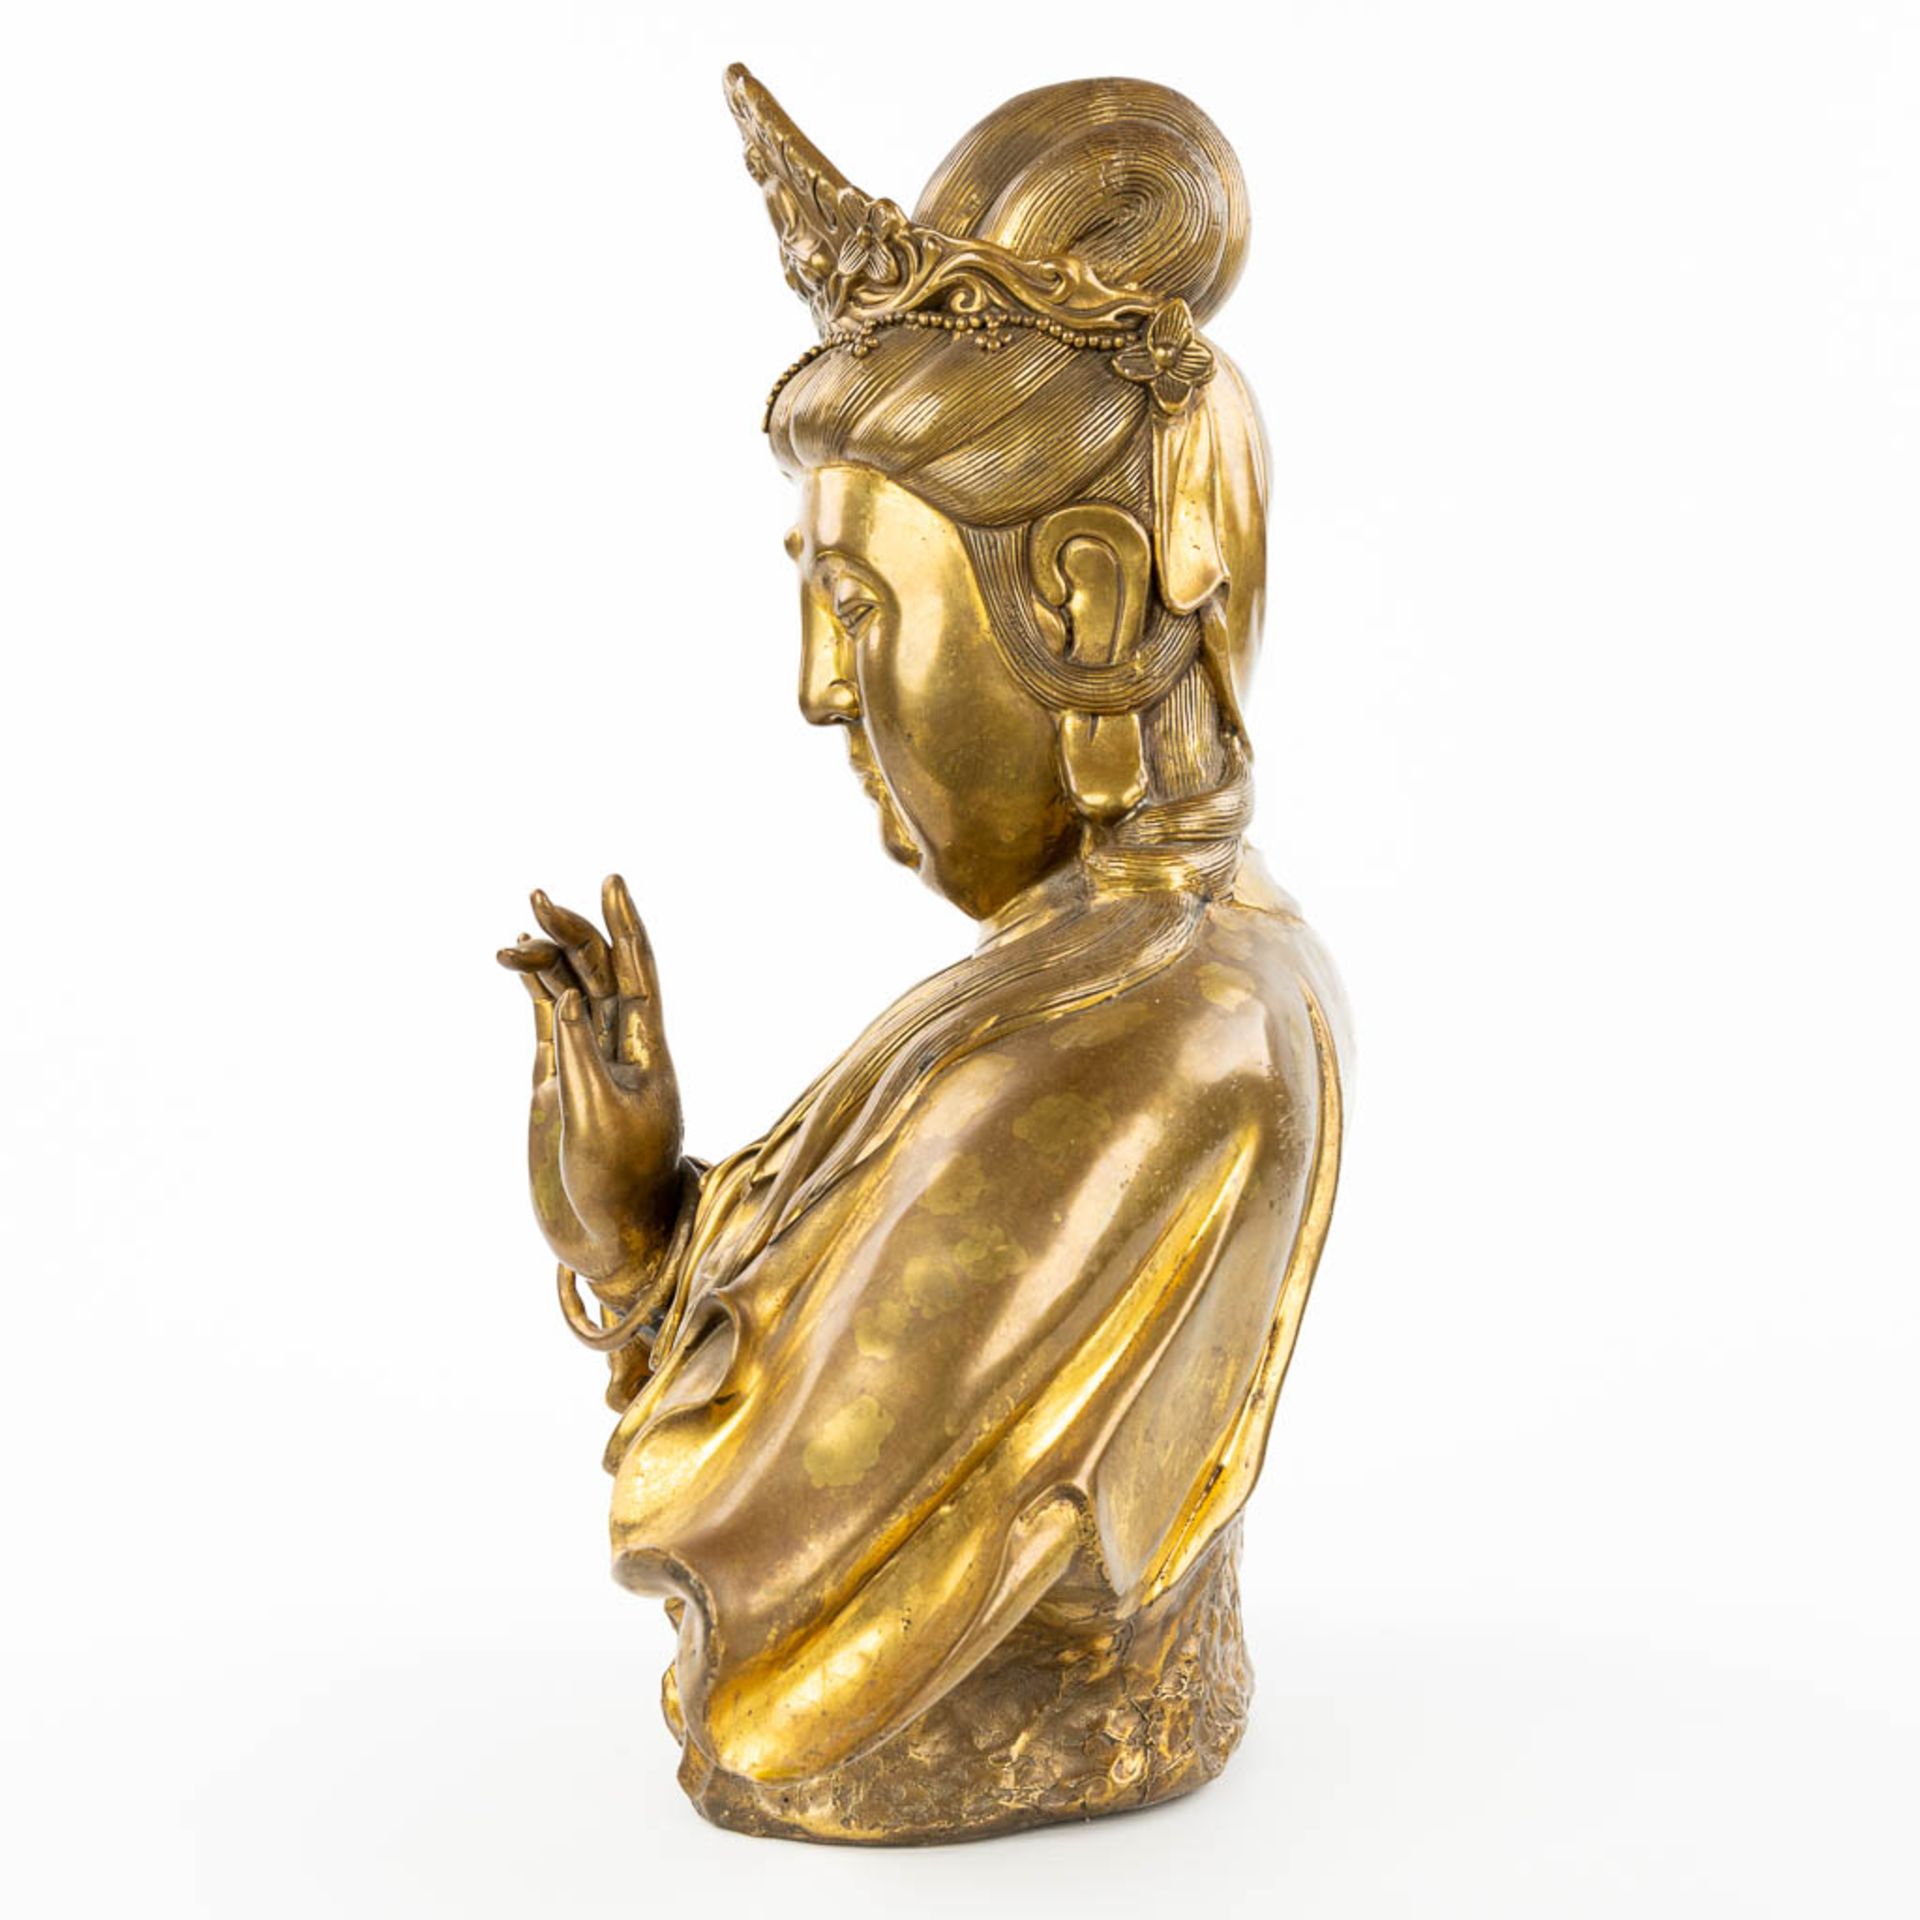 A figurine of Guanyin made of bronze. (H:43cm) - Image 4 of 10